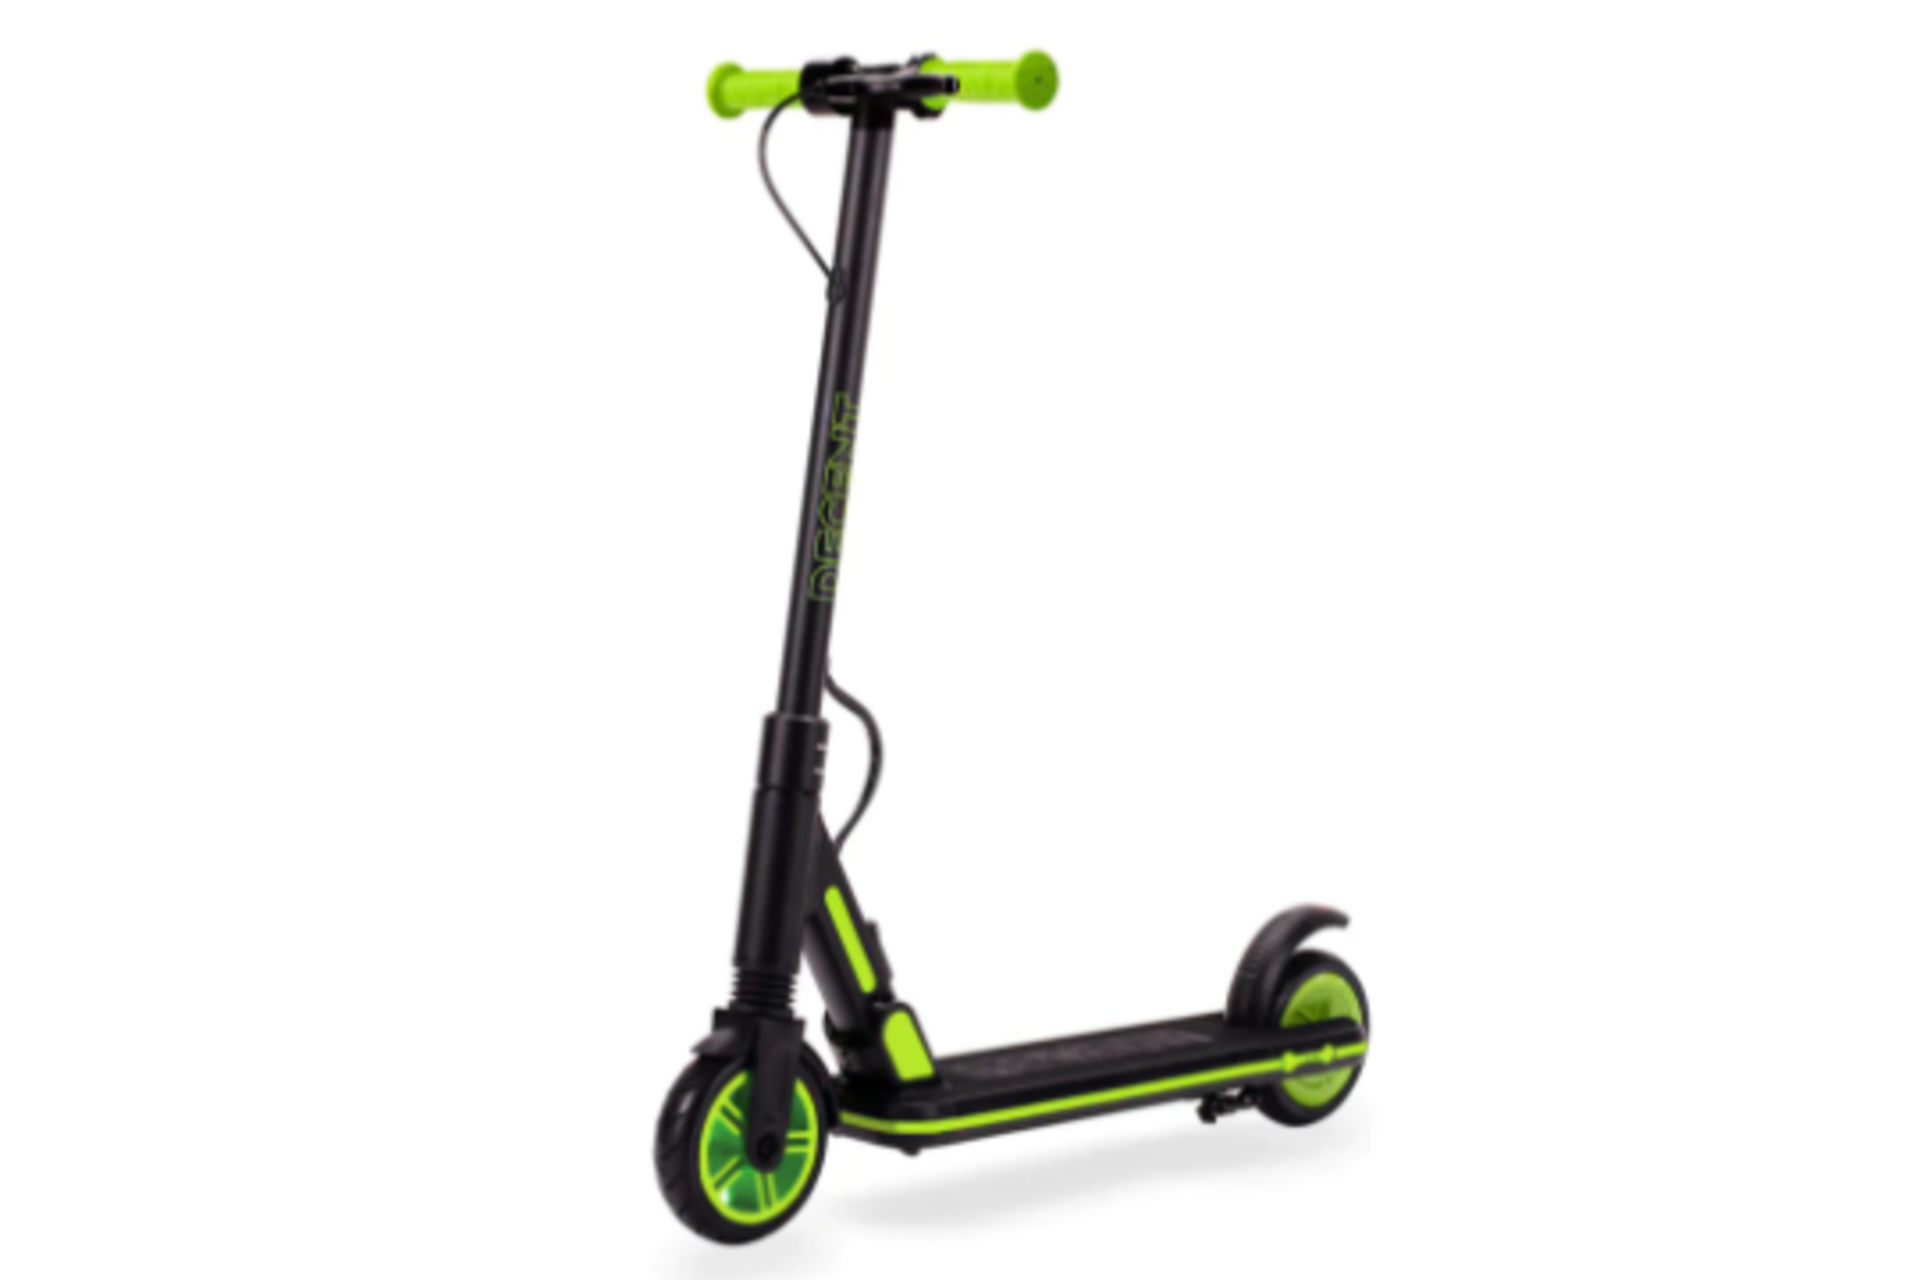 Trade Lot 10 x New &Boxed DECENT Kids Electric Scooter - Blue/Green. Let your kids zip around in